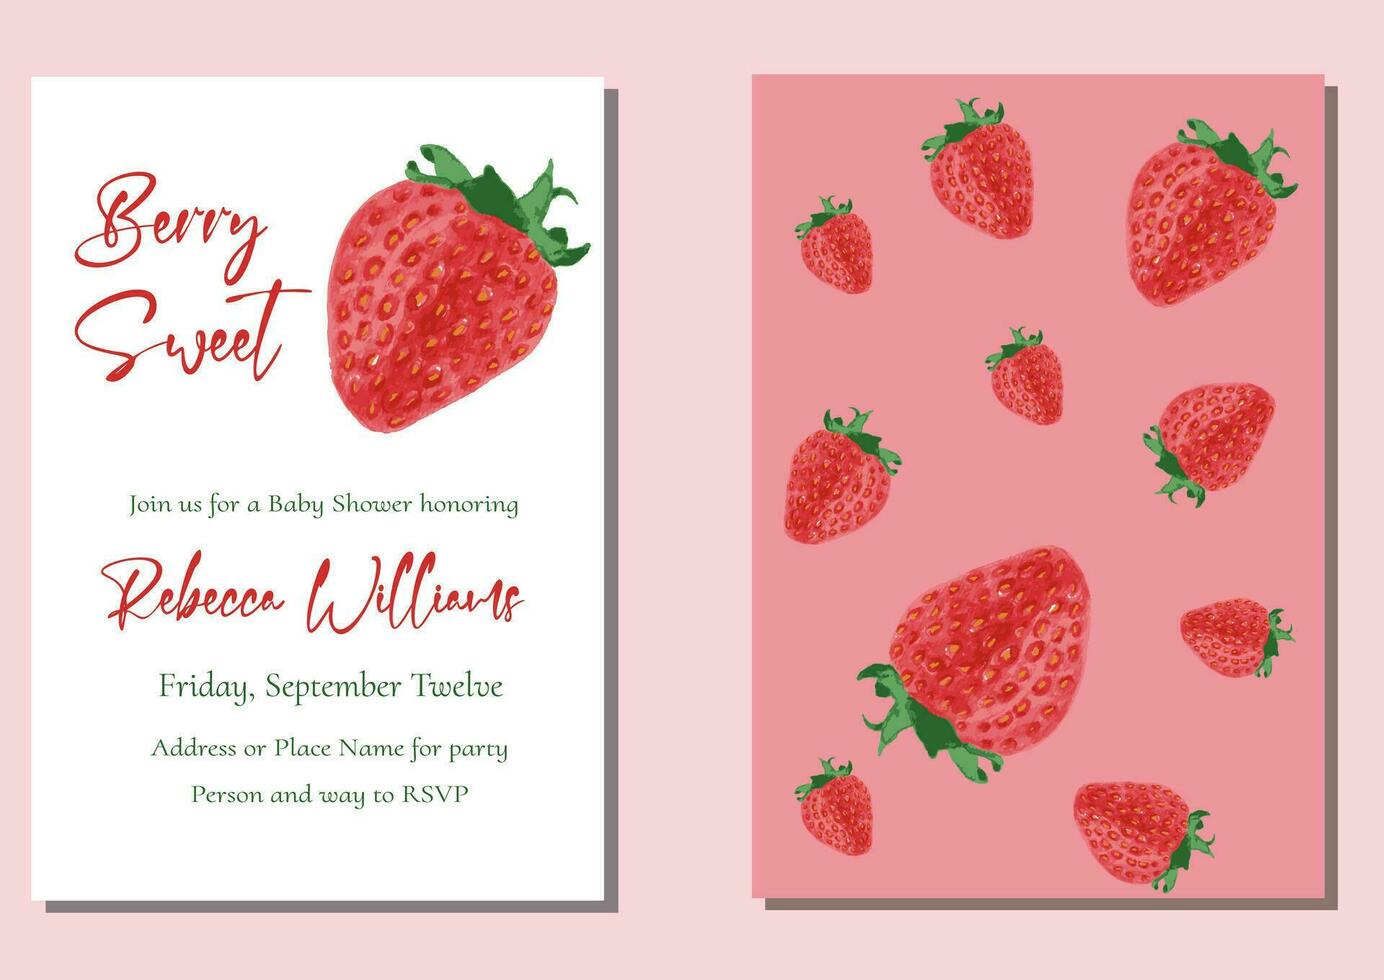 Berry Sweet Themed Strawberry Baby Shower Invitation. This fruit berry invite good also for a birthday party. It can be used for thank you cards, banner, posters, welcome sign and more vector